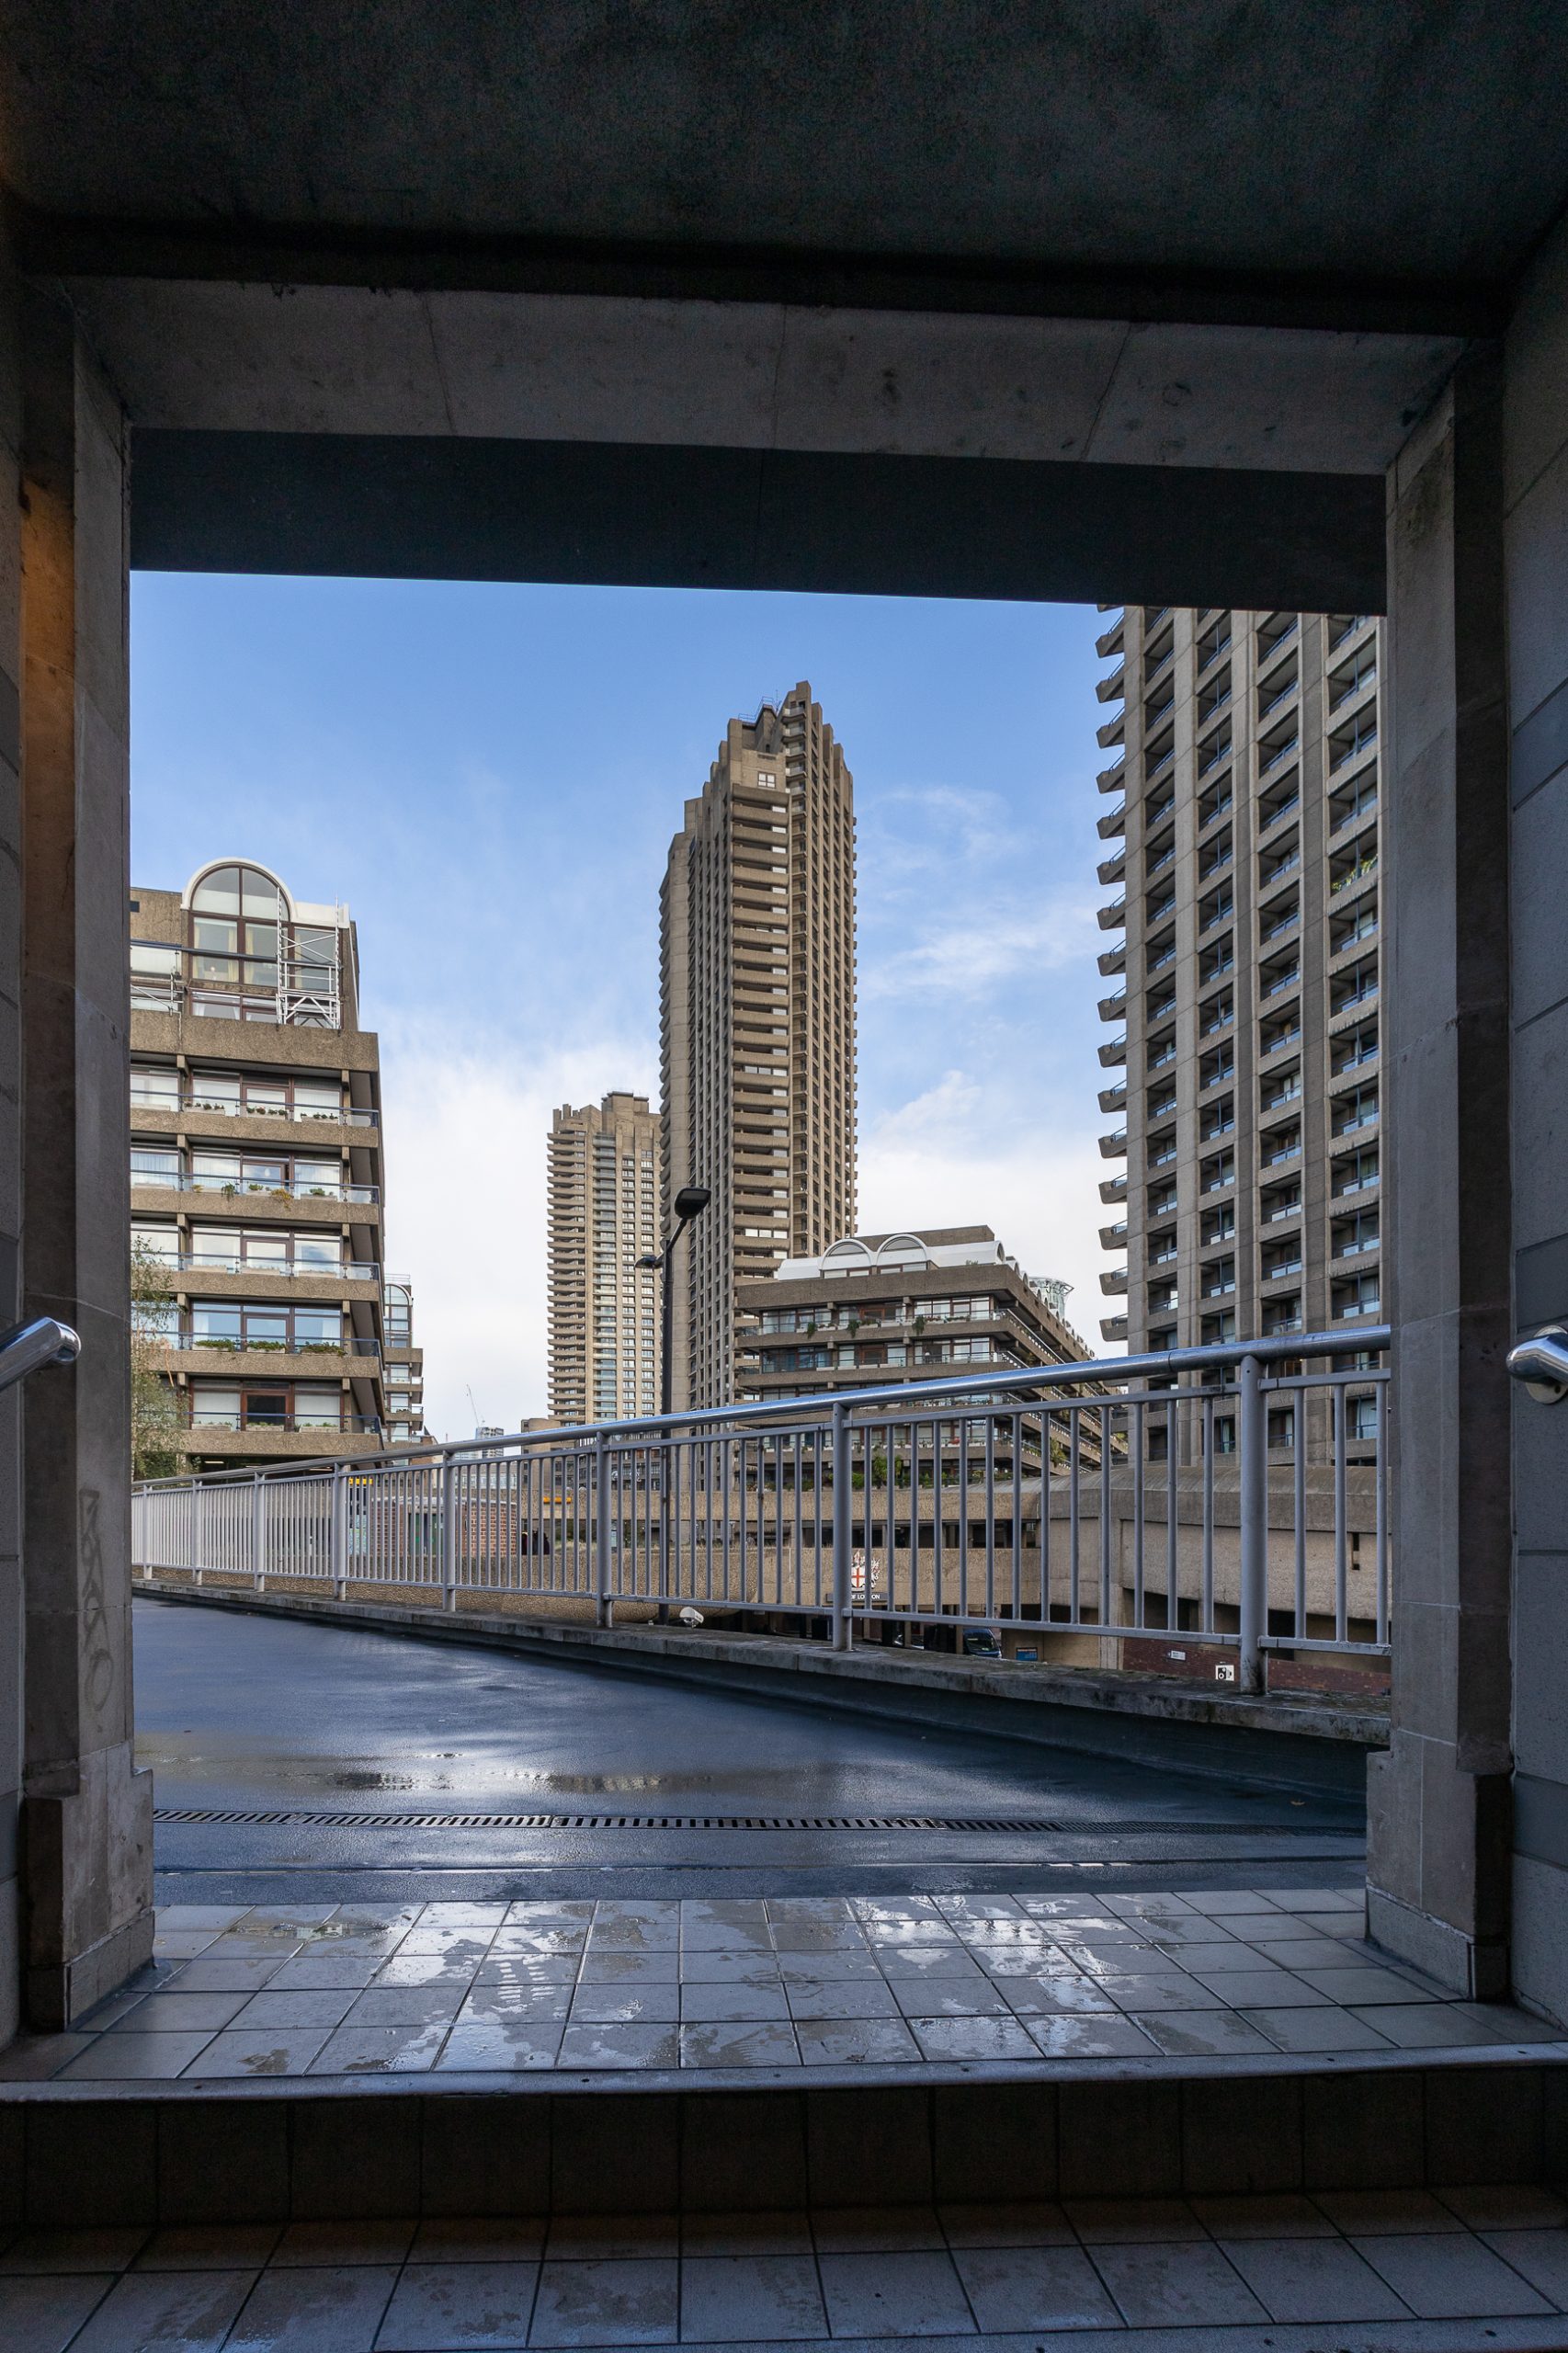 Photo showing the Barbican Estate towers framed by the exit onto a walkway